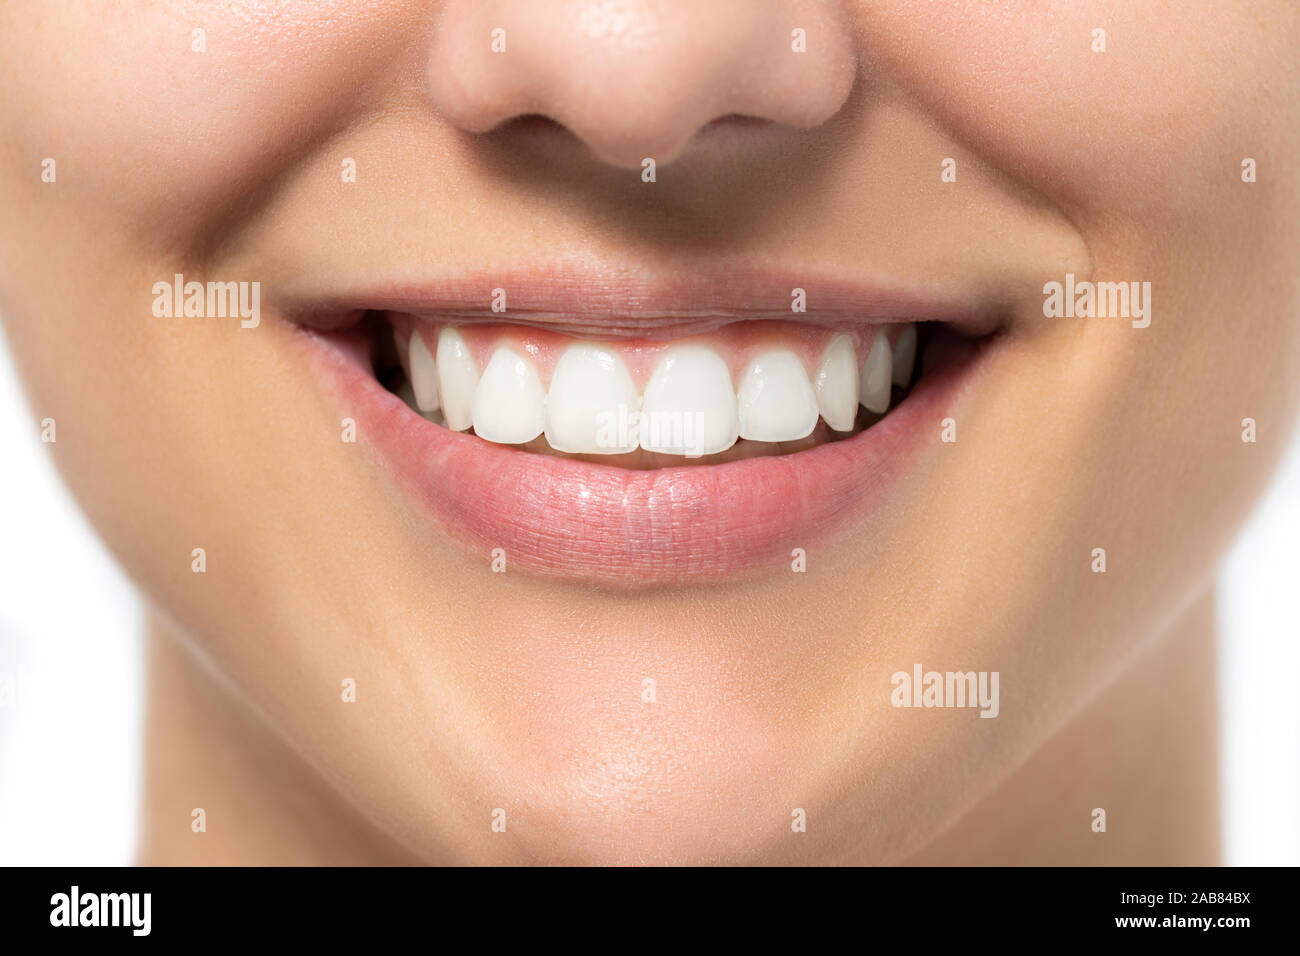 Extreme close up of charming female smile. Young woman showing white healthy teeth. Stock Photo